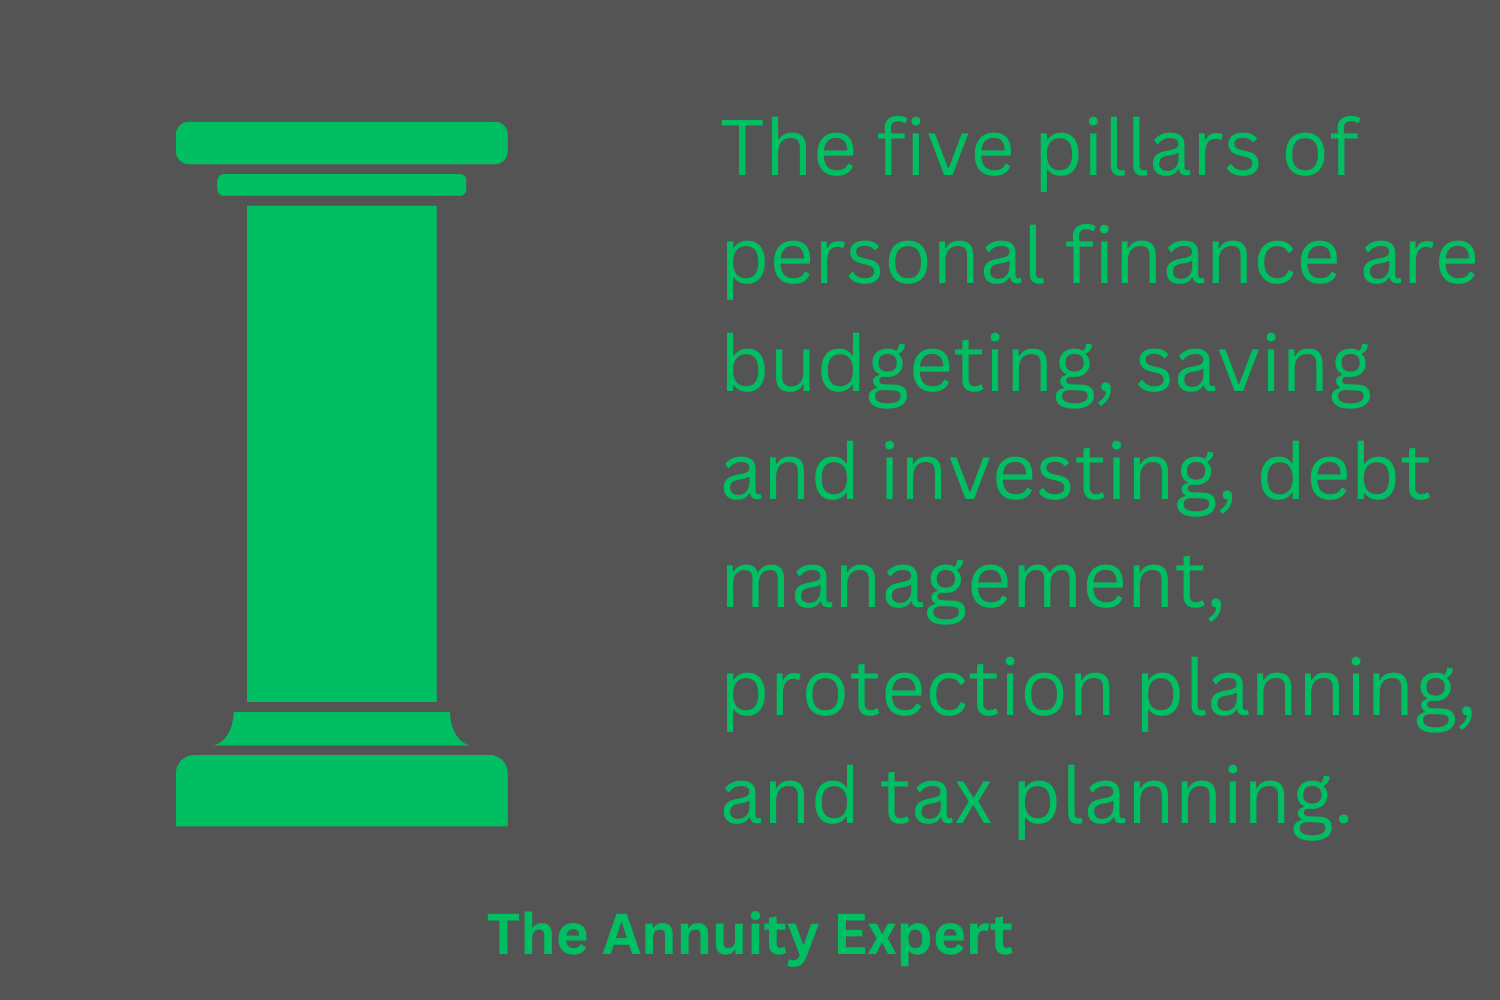 What Are The Five Pillars Of Personal Finance?